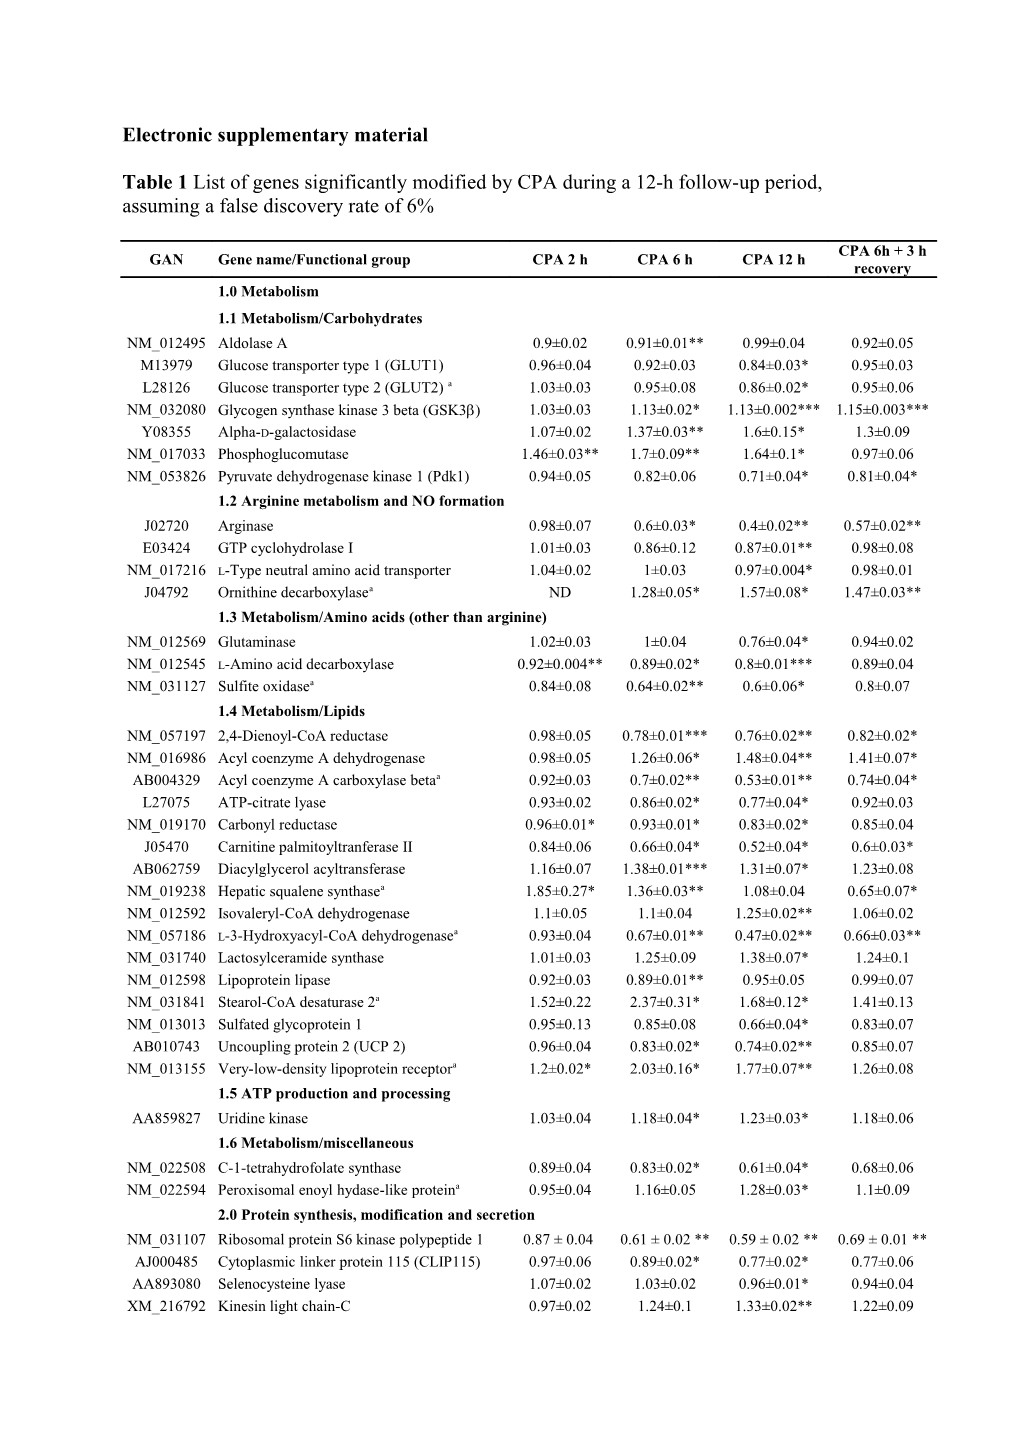 Table S1: List of Genes Significantly Modified by CPA During a 12H Follow-Up Period Assuming